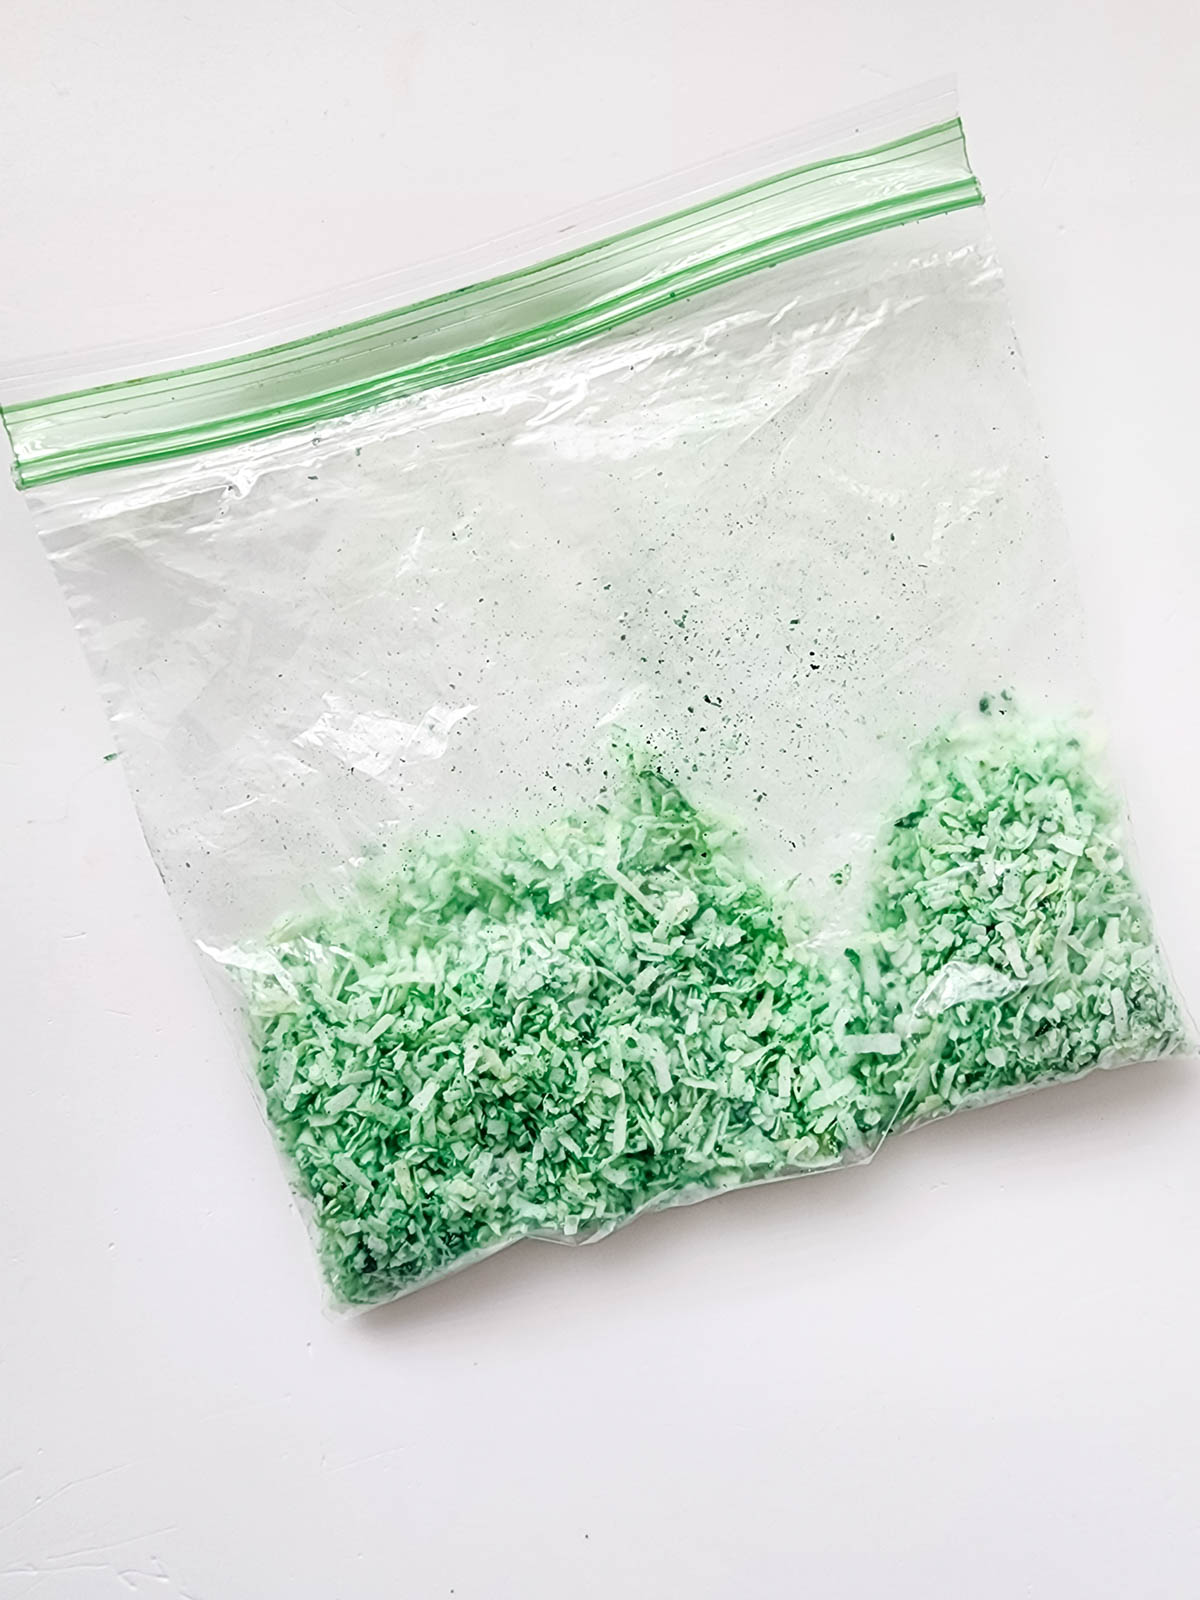 Coconut and green food coloring in bag